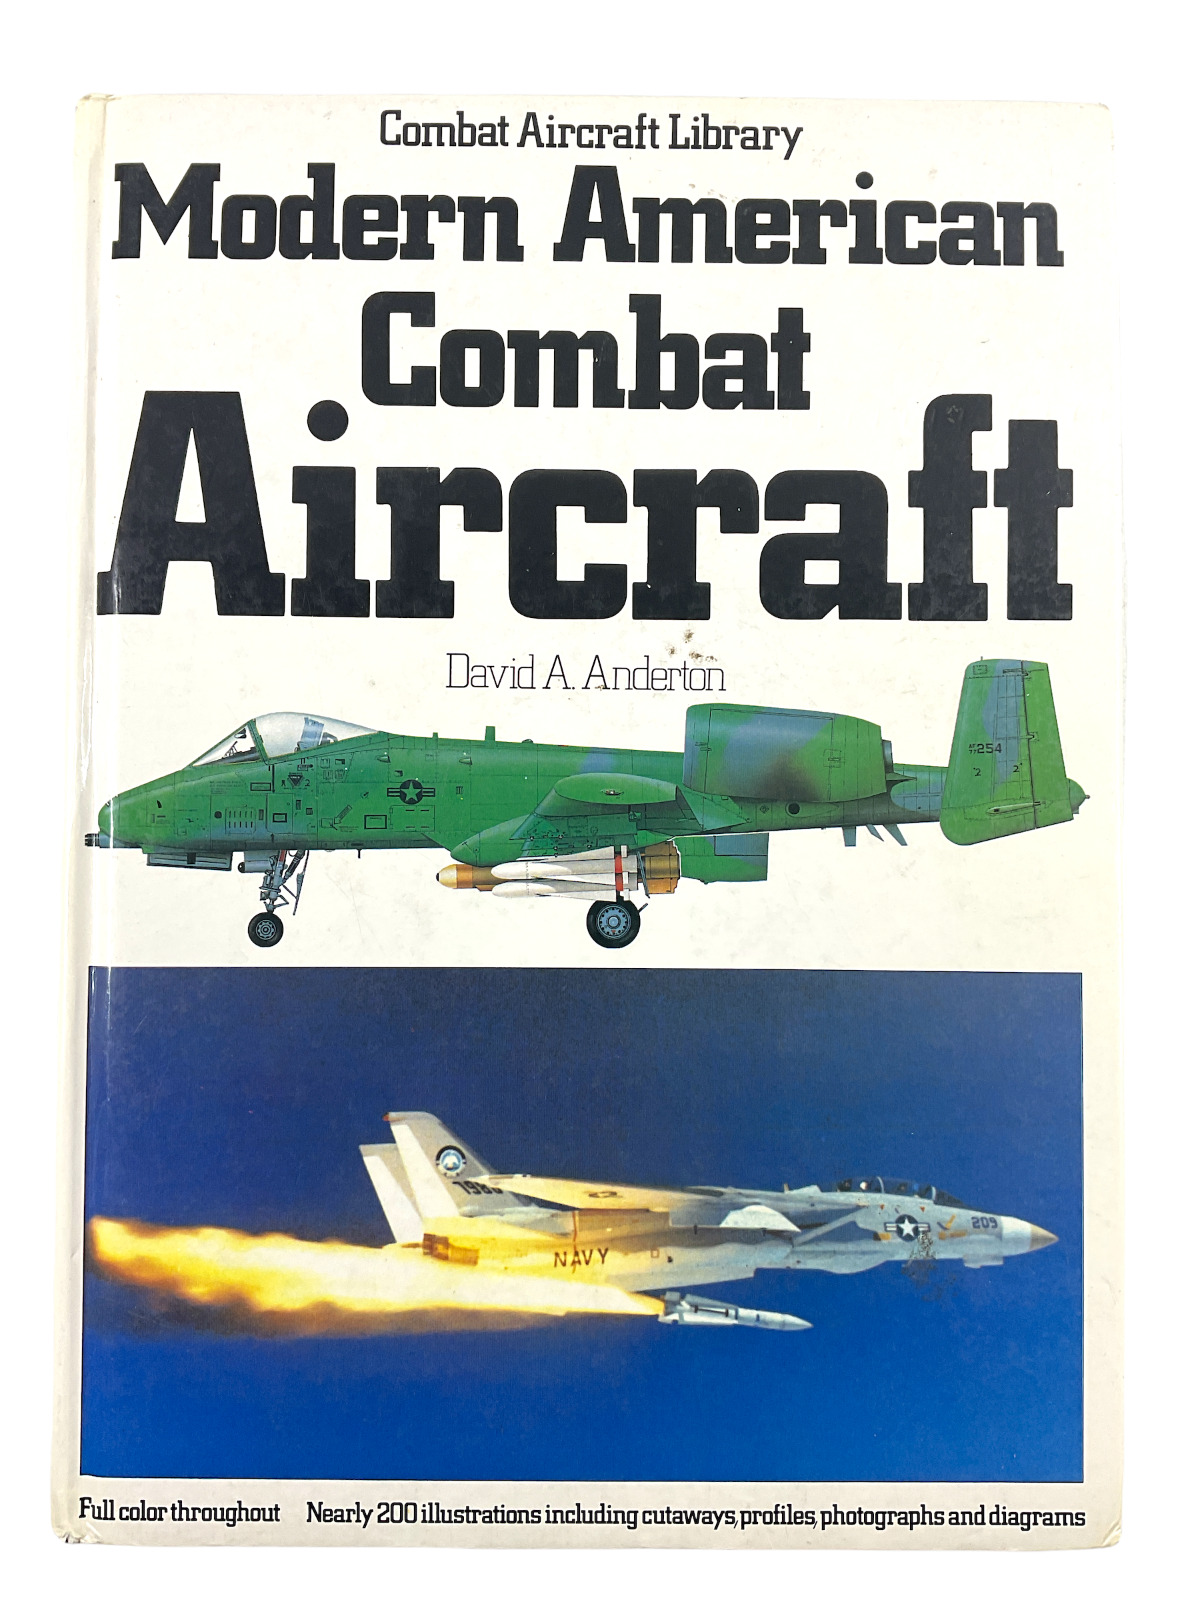 US USAF Modern American Combat Aircraft Hard Cover Reference Book